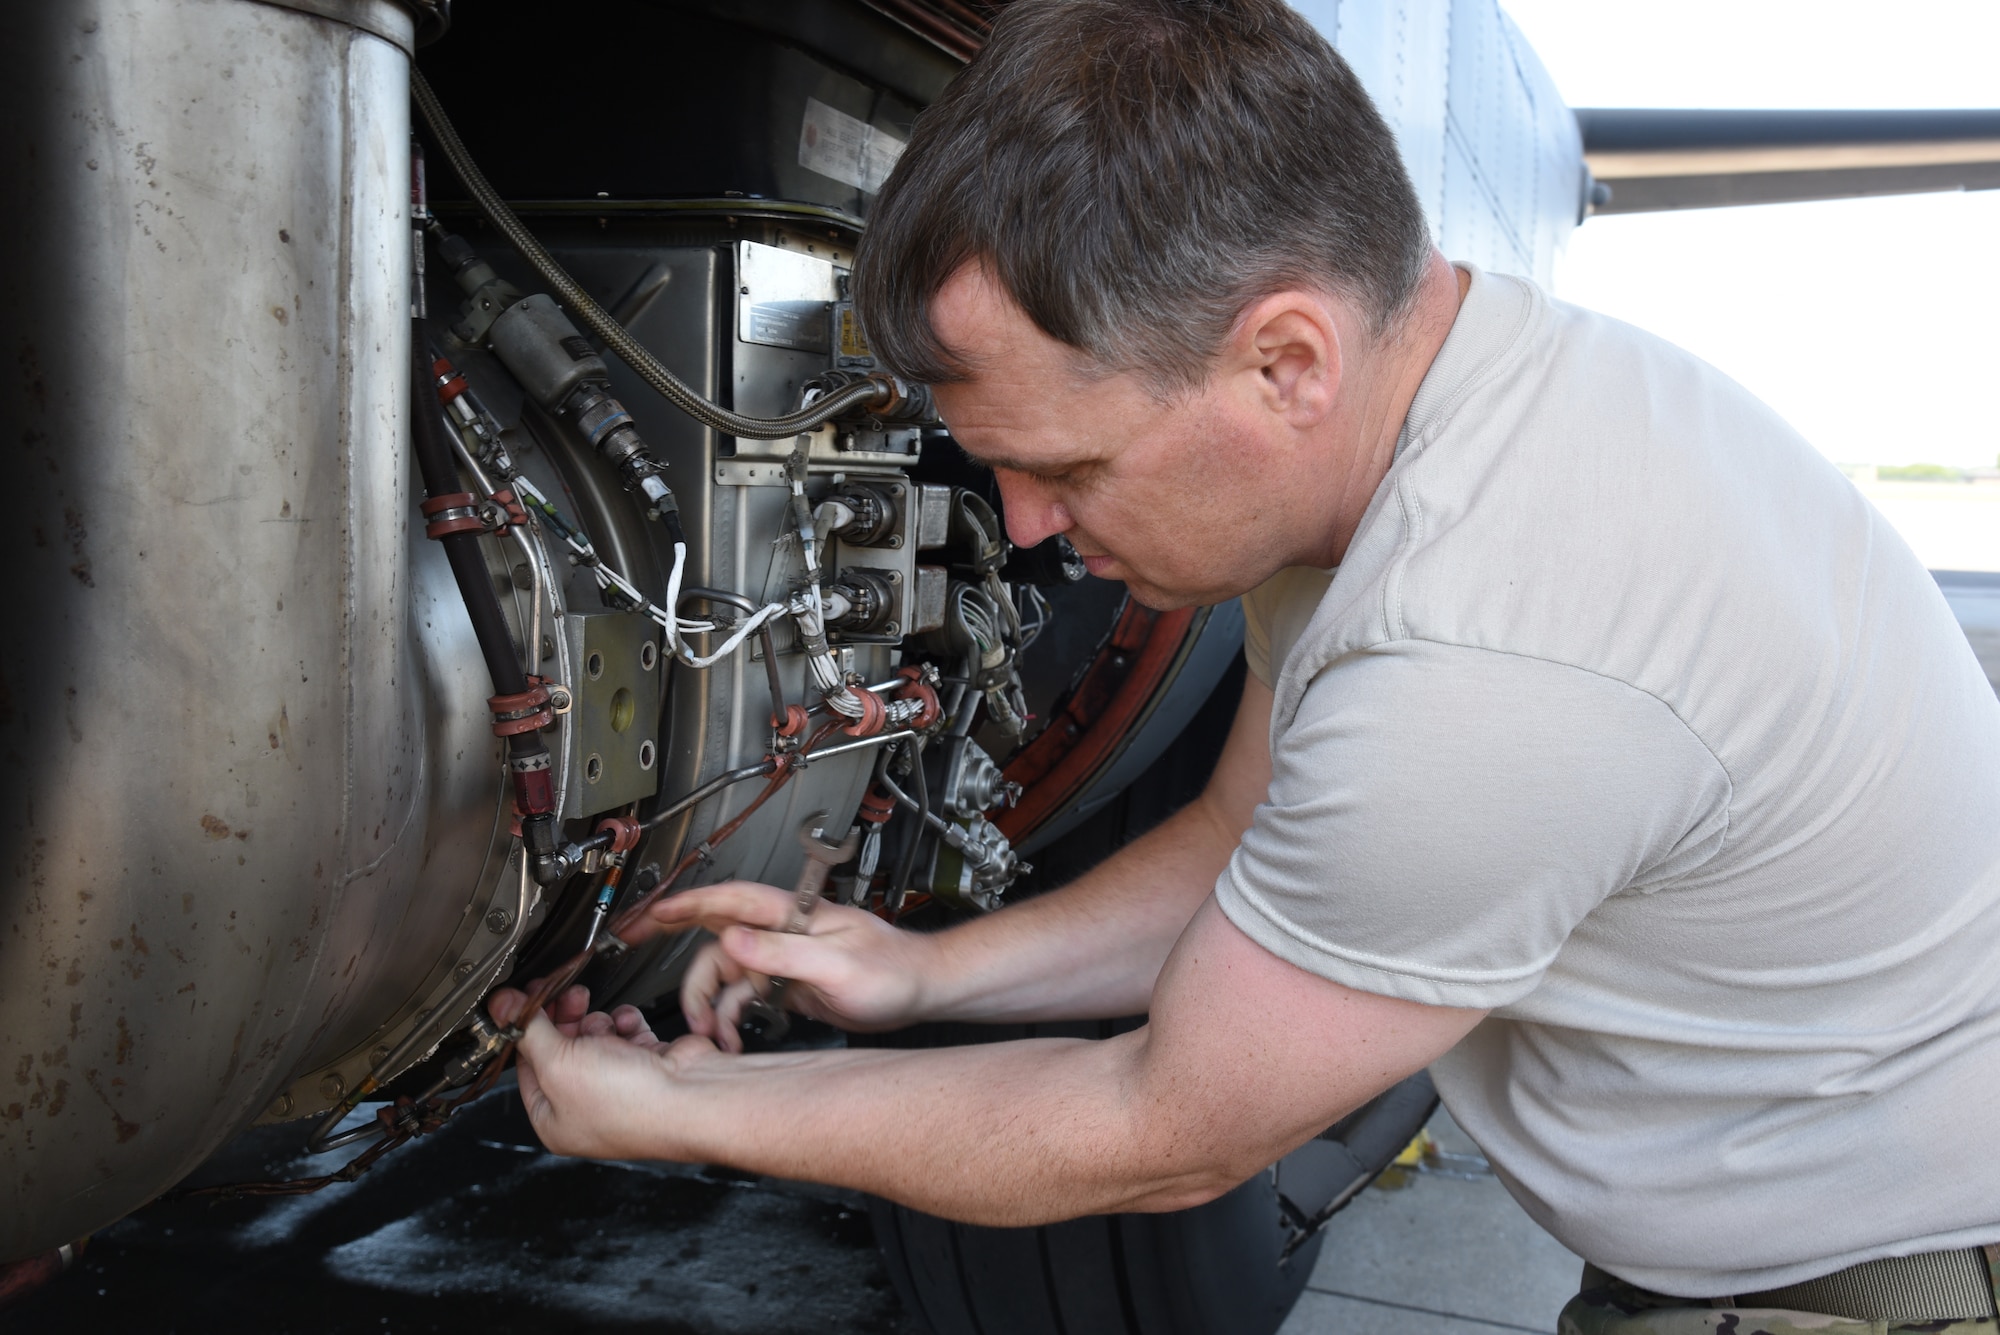 Tech. Sgt. Benjamin Cox ,403rd Maintenance Squadron propulsion technician, adjusts the bleed air line to prevent it from rubbing a hole, which could cause a bleed air leak and damage to the auxillary power unit before the Engine Compressor Wash on an 815th Airlift Squadron C-130J Super Hercules before the aircraft goes for inspection in the Isochronal Dock for a "C" letter inspection at Keesler Air Force Base, Mississippi May 11, 2020. These inspections or letter checks can range from "A" five days basic check, "B" 18 days and more in depth, to "C" 22 days which is the most intrusive inspection; but are necessary to keep the aircraft maintained. (U.S. Air Force photo by Jessica L. Kendziorek)